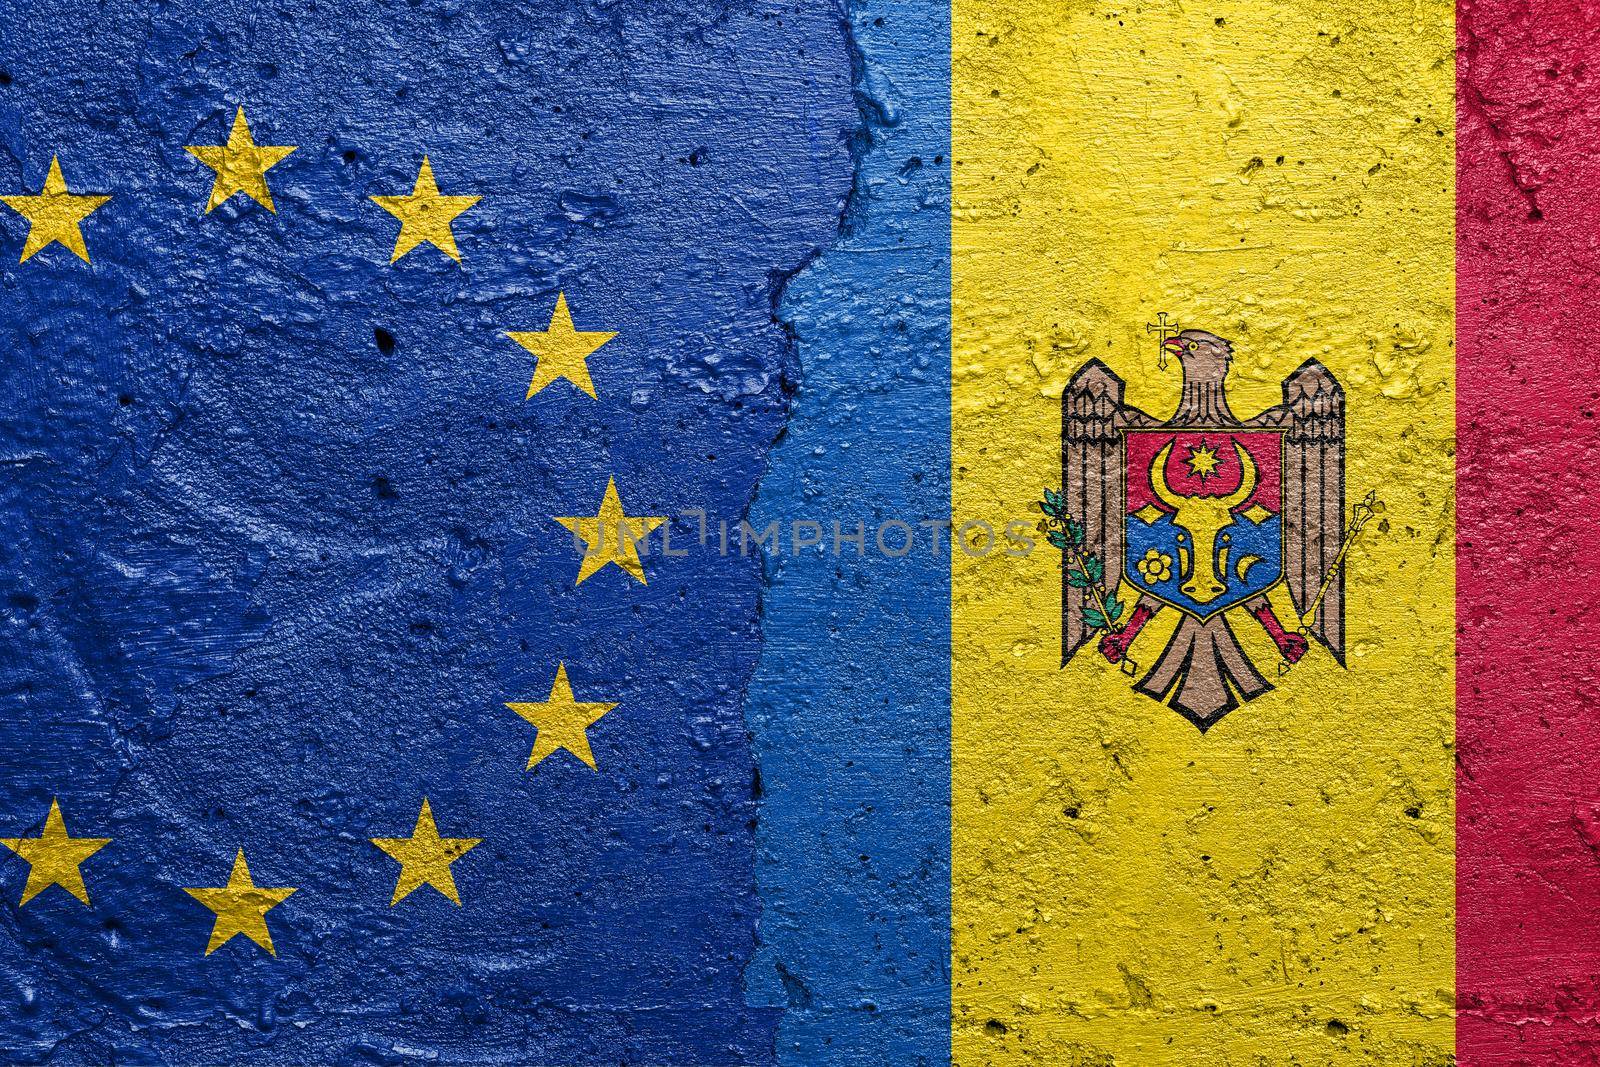 European Union and Moldova flags  - Cracked concrete wall painted with a EU flag on the left and a Moldovan flag on the right